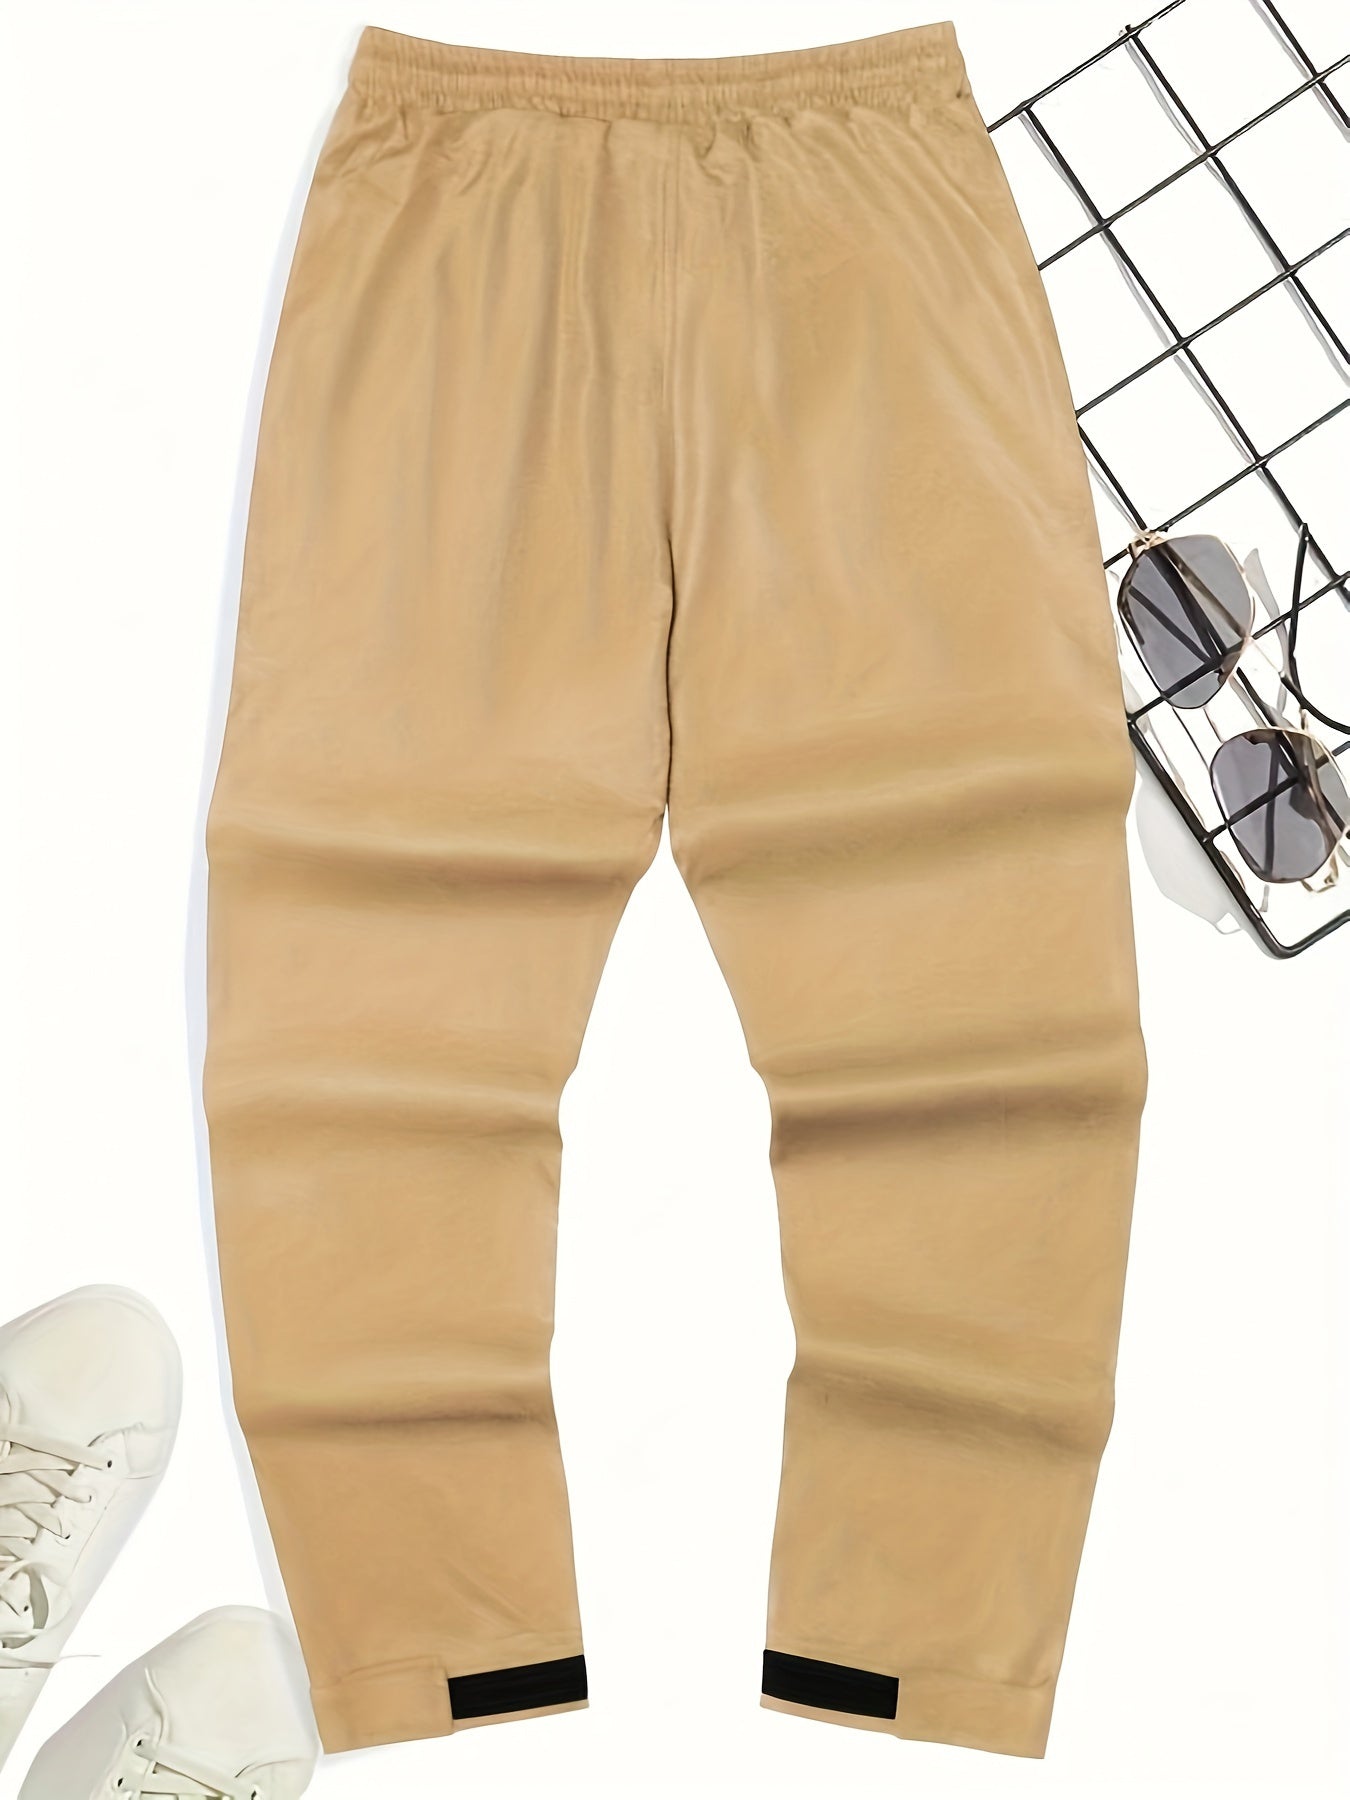 Men's Trendy Tapered Pants, Casual Stretch Waist Drawstring Joggers With Pockets